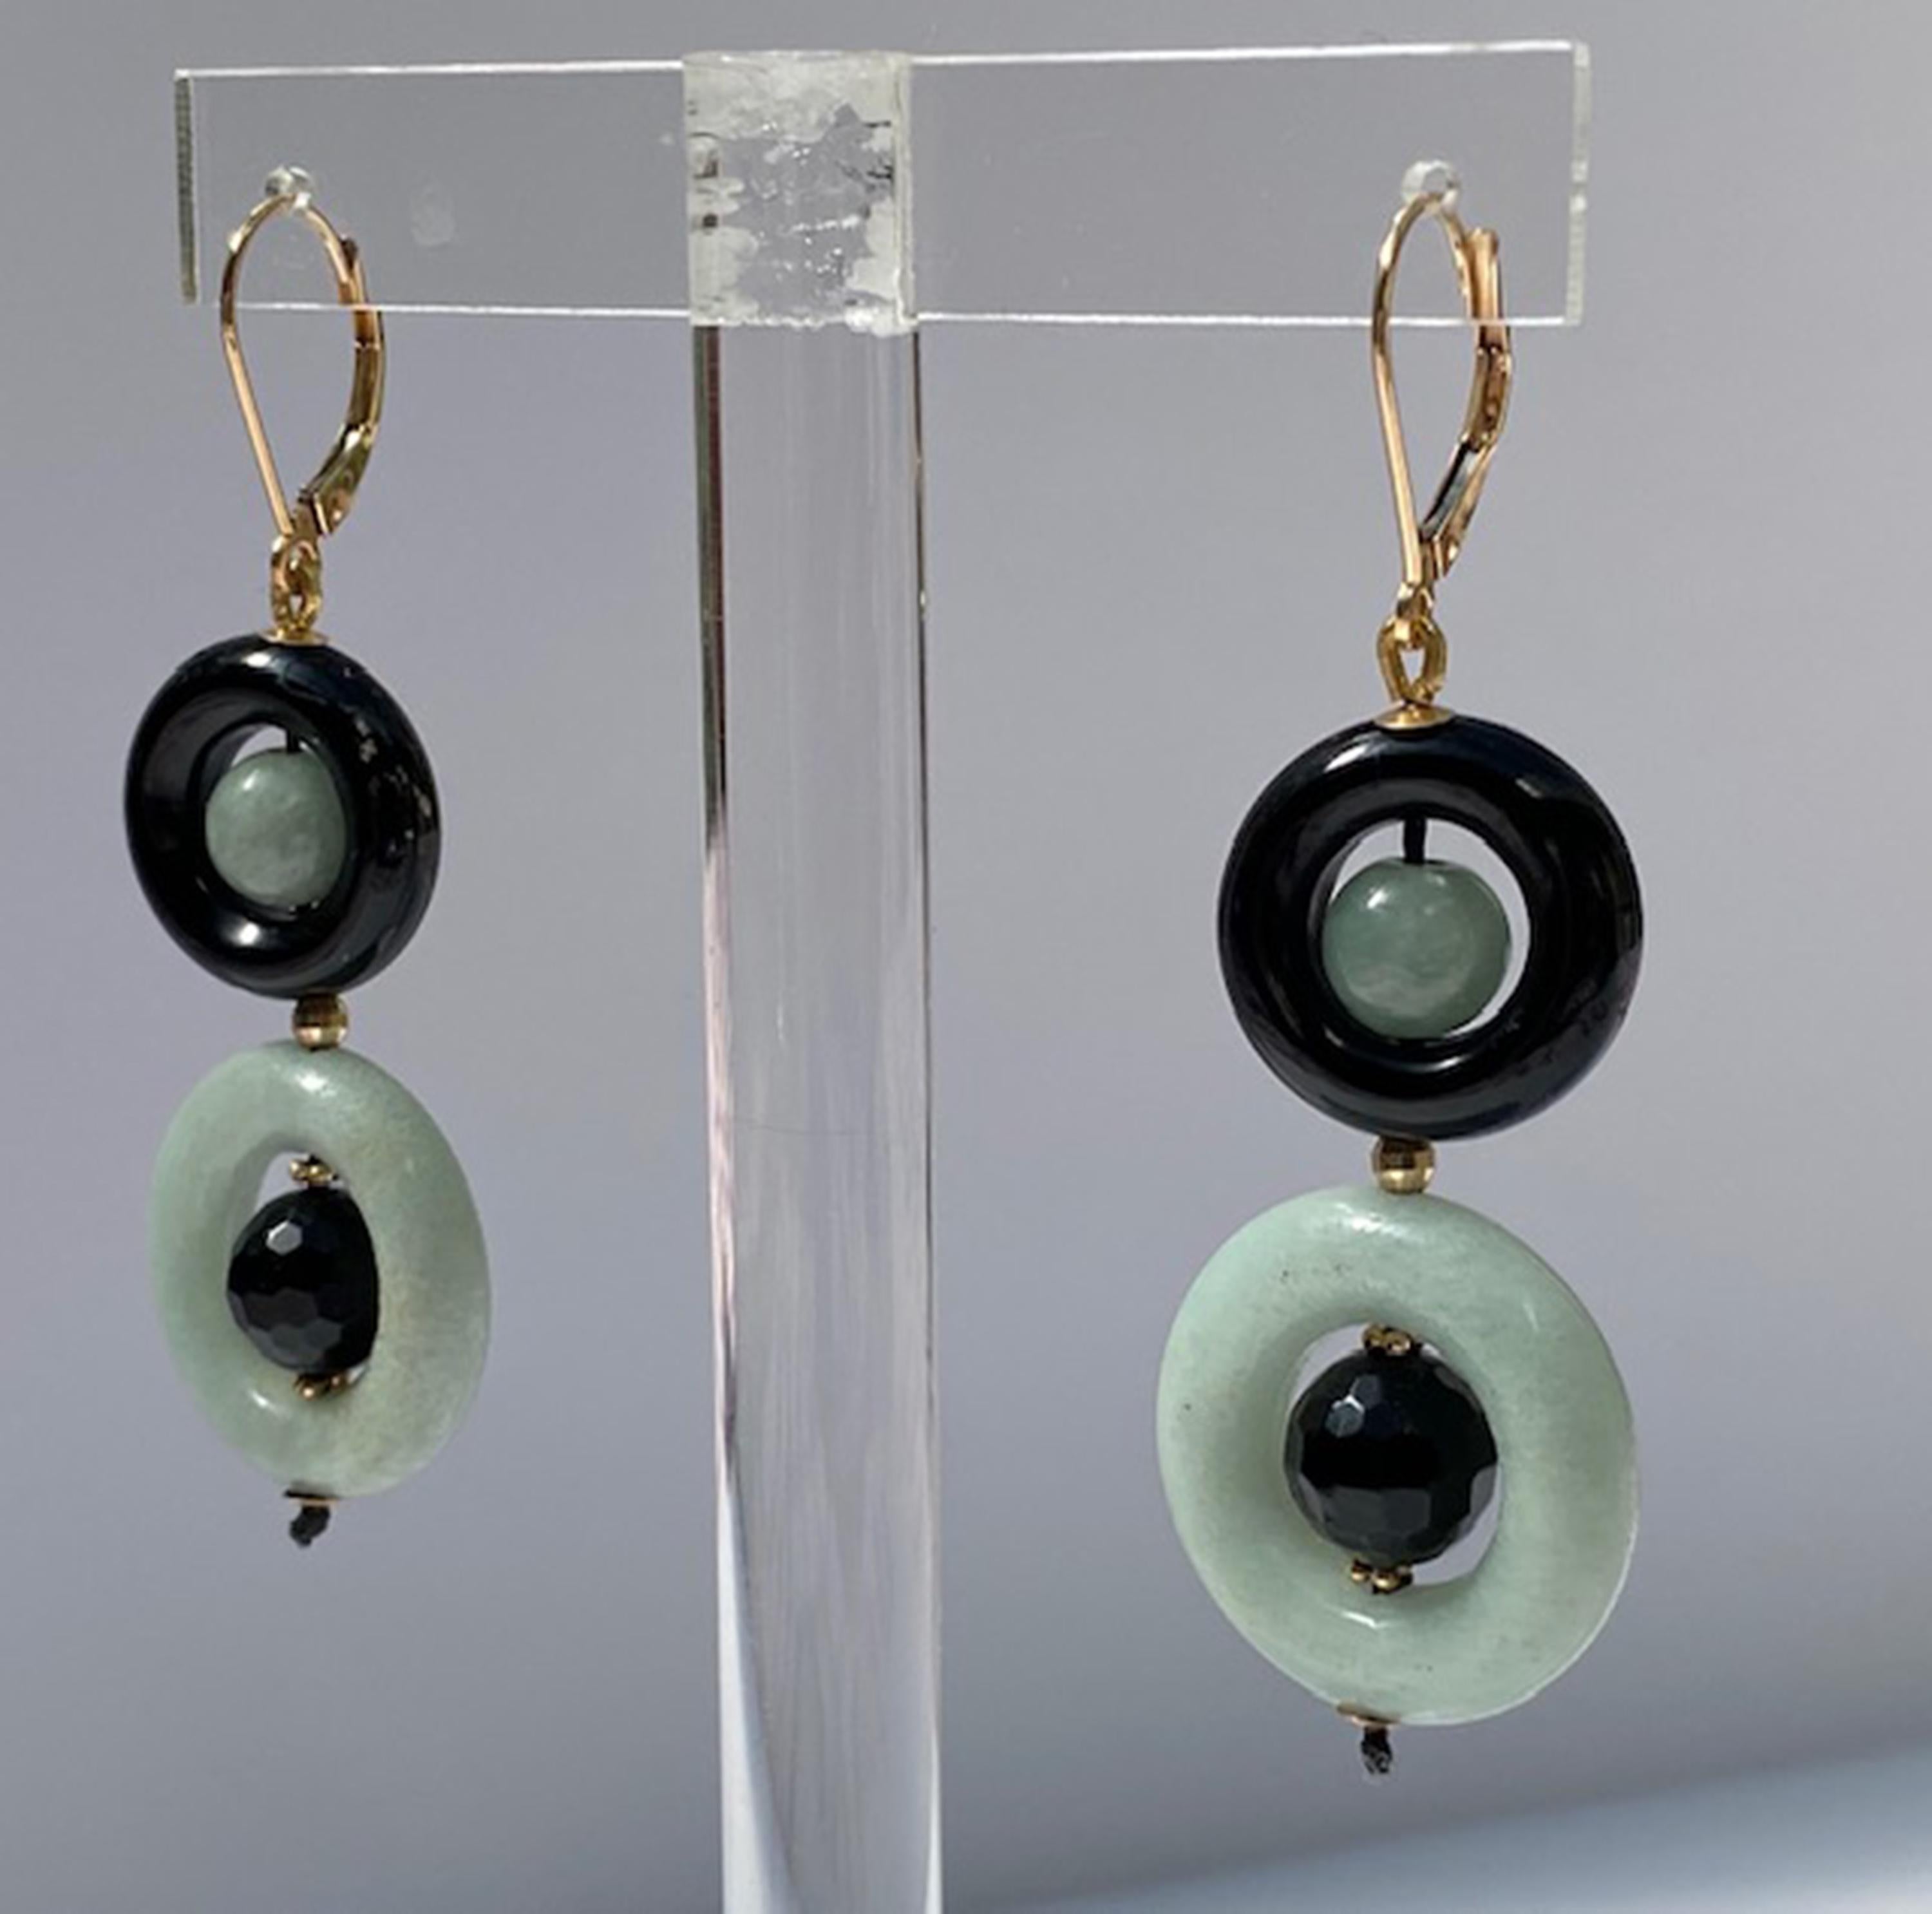 These elegant and sophisticated black onyx bead ring and jade bead ring earrings with 14 k yellow gold lever-back and wiring are beautiful and bold. The onyx rings contrast with the jade beads beautifully making, what could have been simple earrings